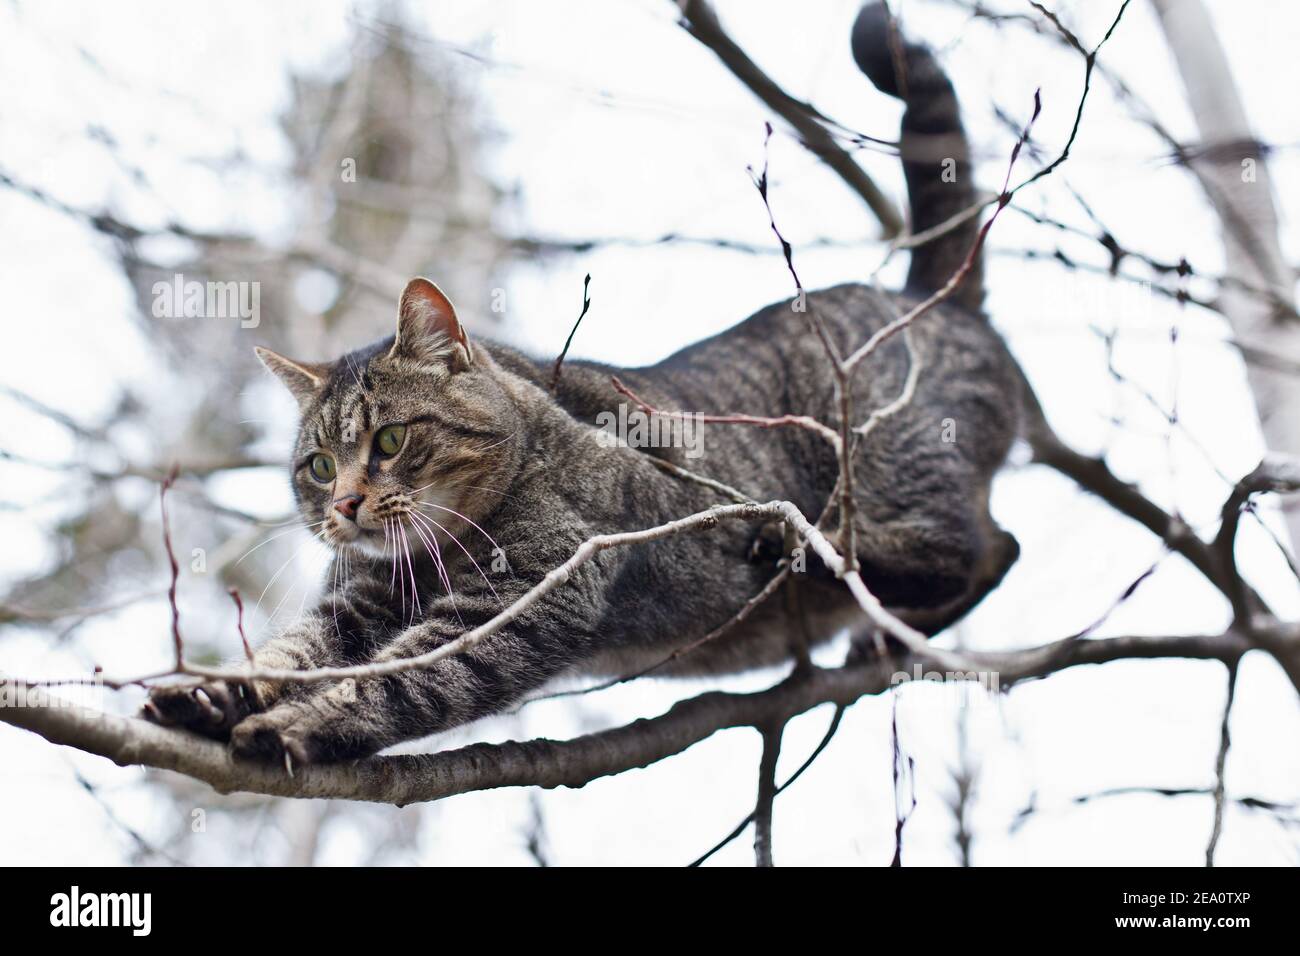 A tomcat balancing on a small branch Stock Photo